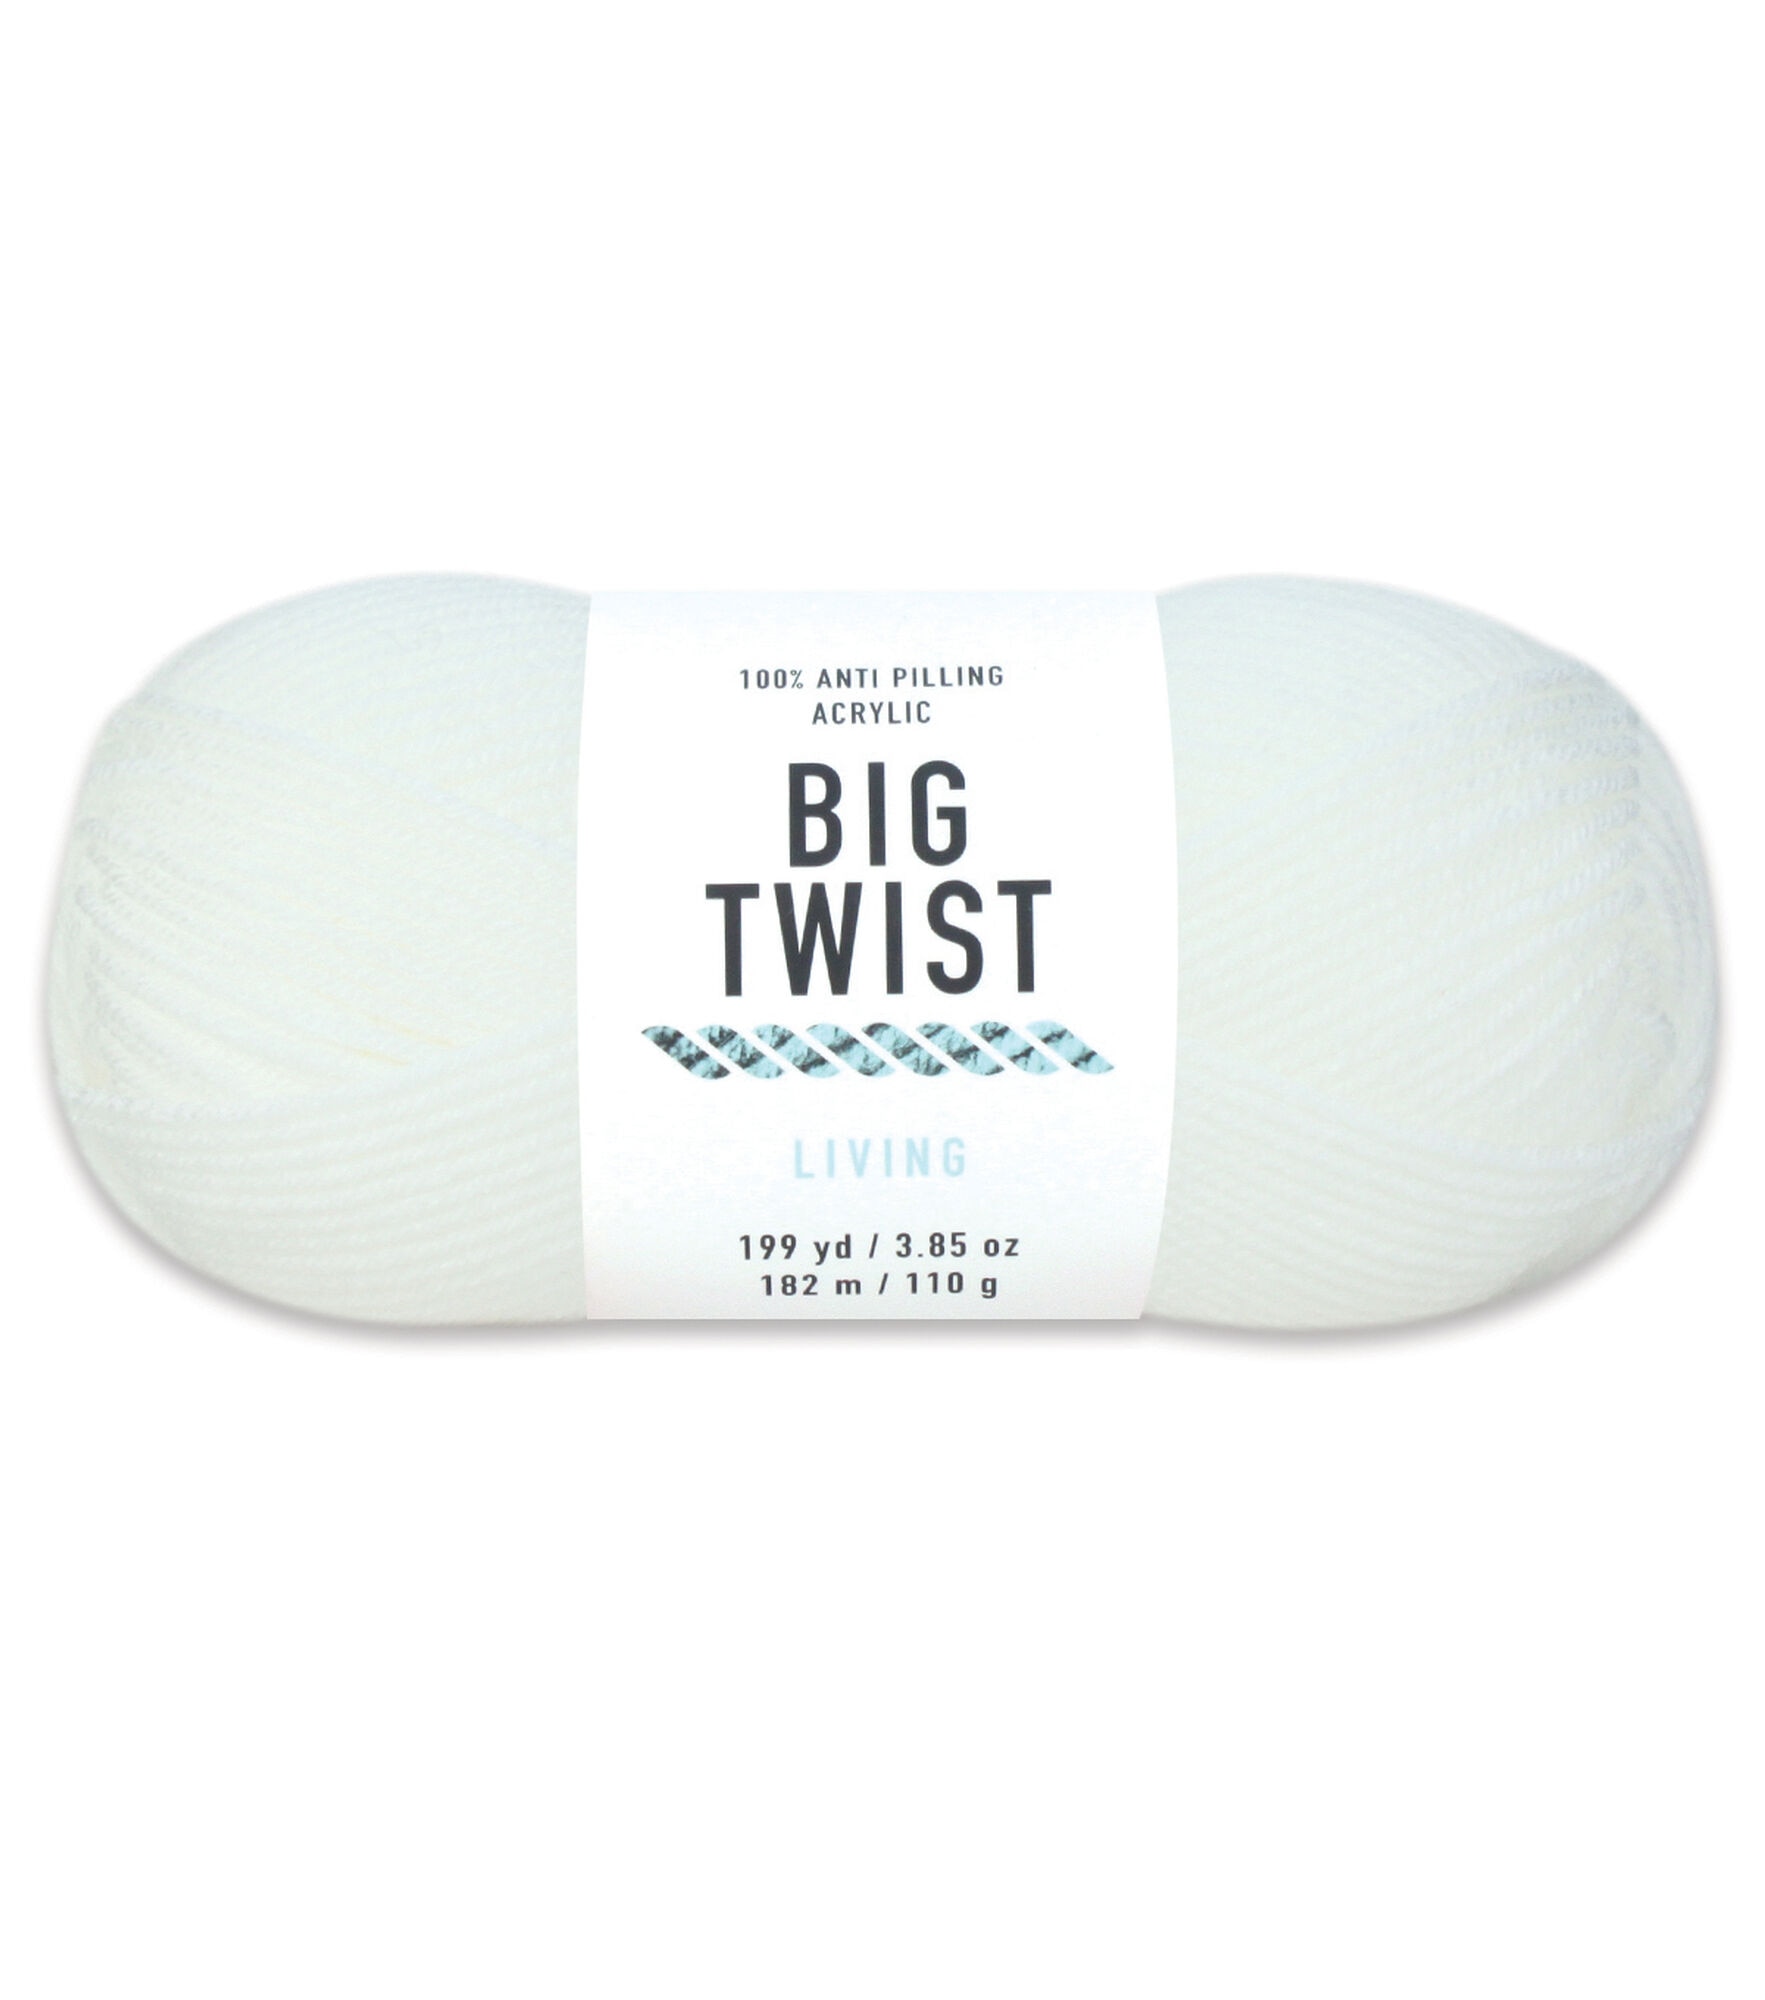 Anti Pilling Living 199yd Worsted Acrylic Yarn by Big Twist, Snow White, hi-res